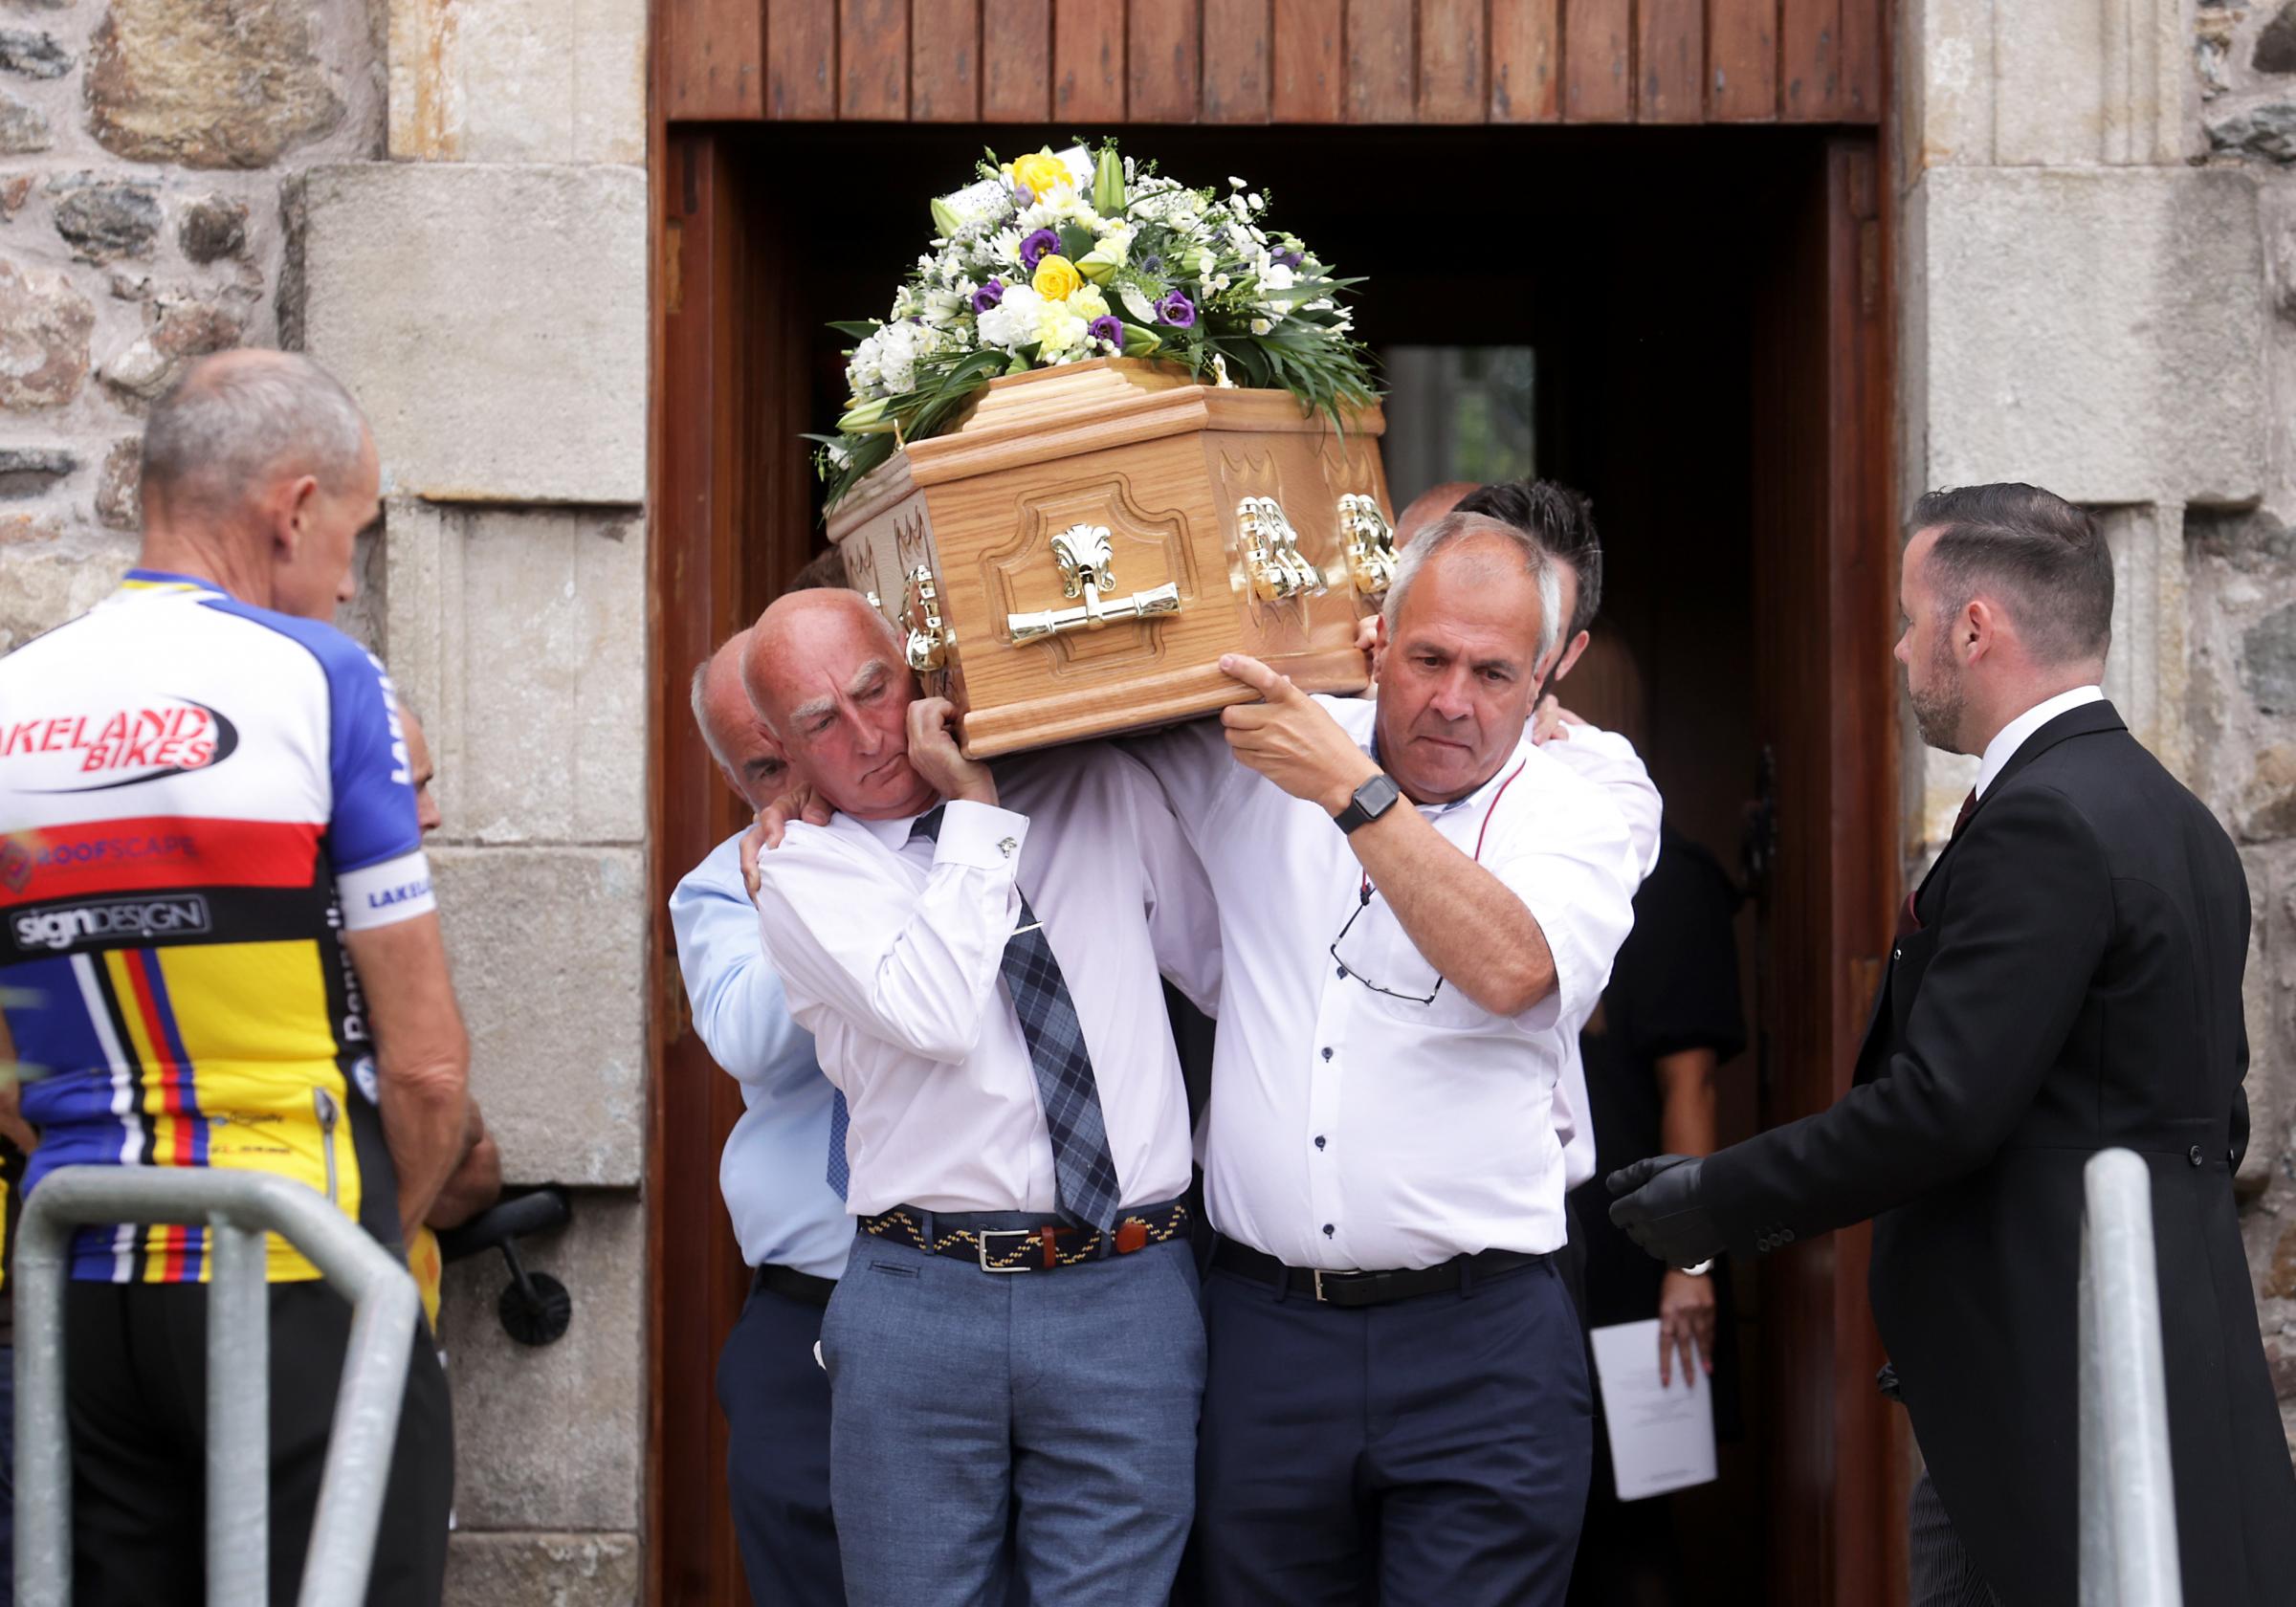 The remains of William Lyons, carried by members of his family, as it leaves St. Johns, Church of Ireland Church, Fivemiletown, for burial in the adjoining graveyard.